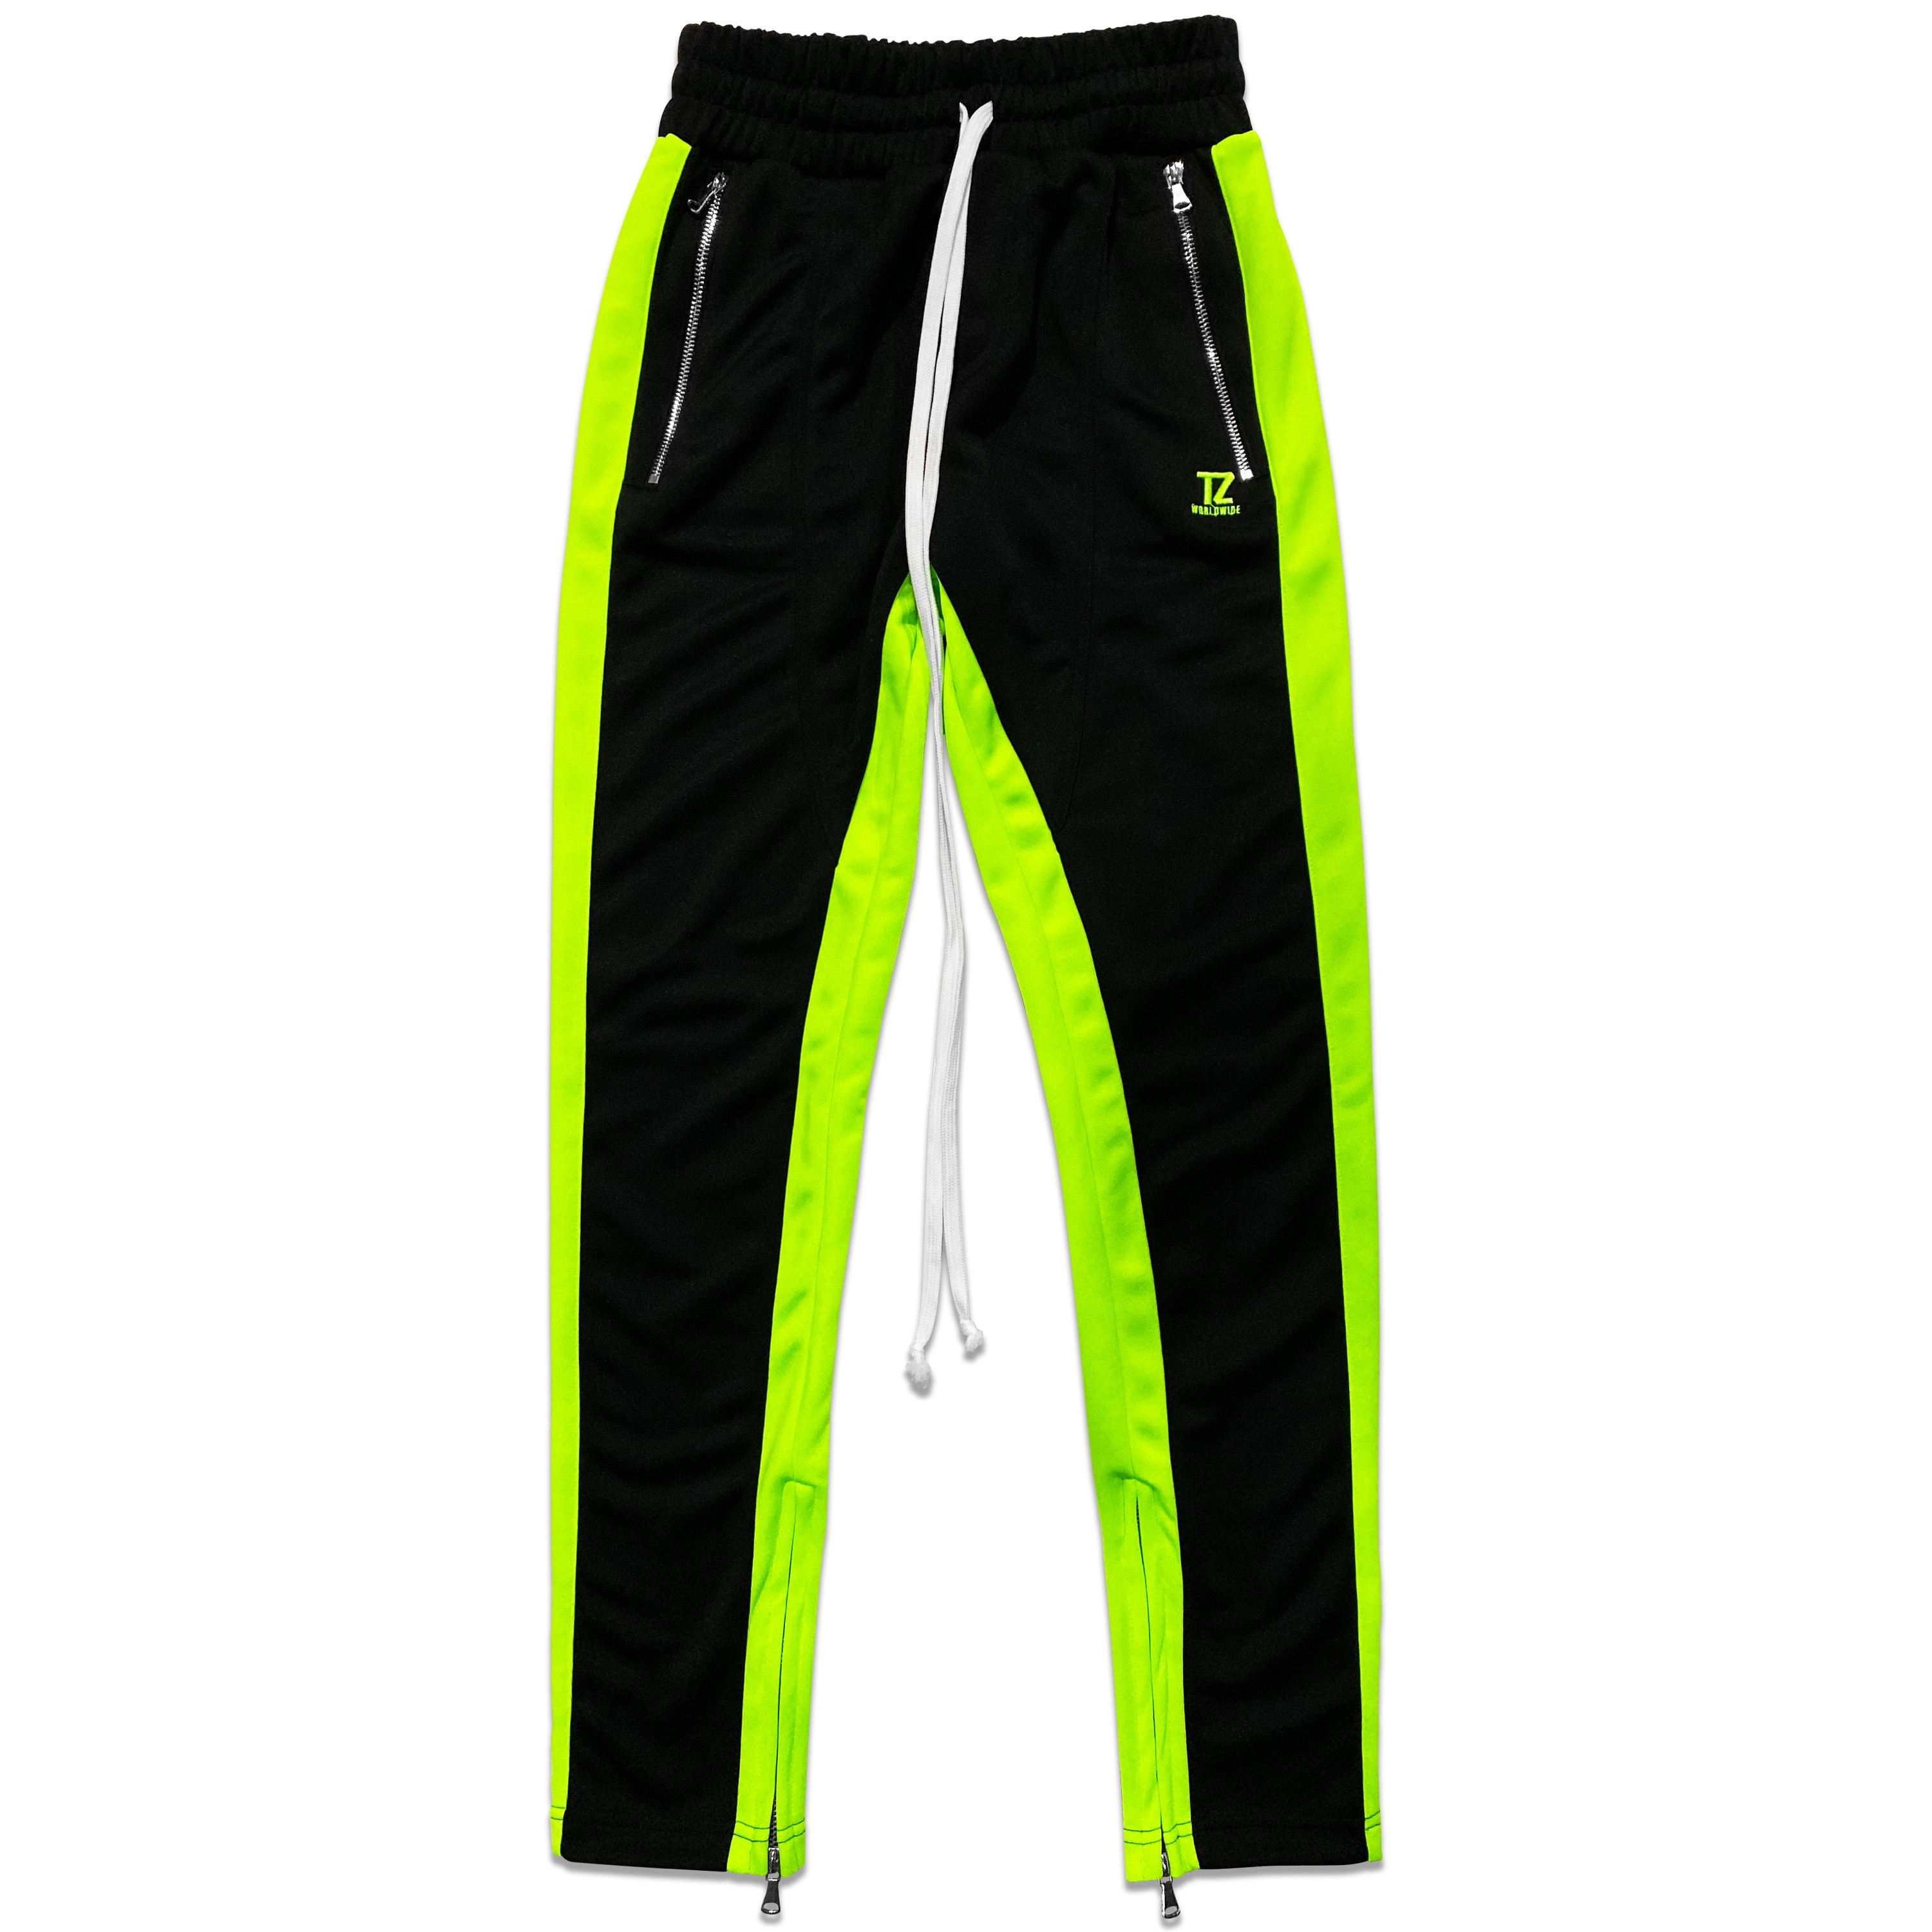 black track pants with green stripe